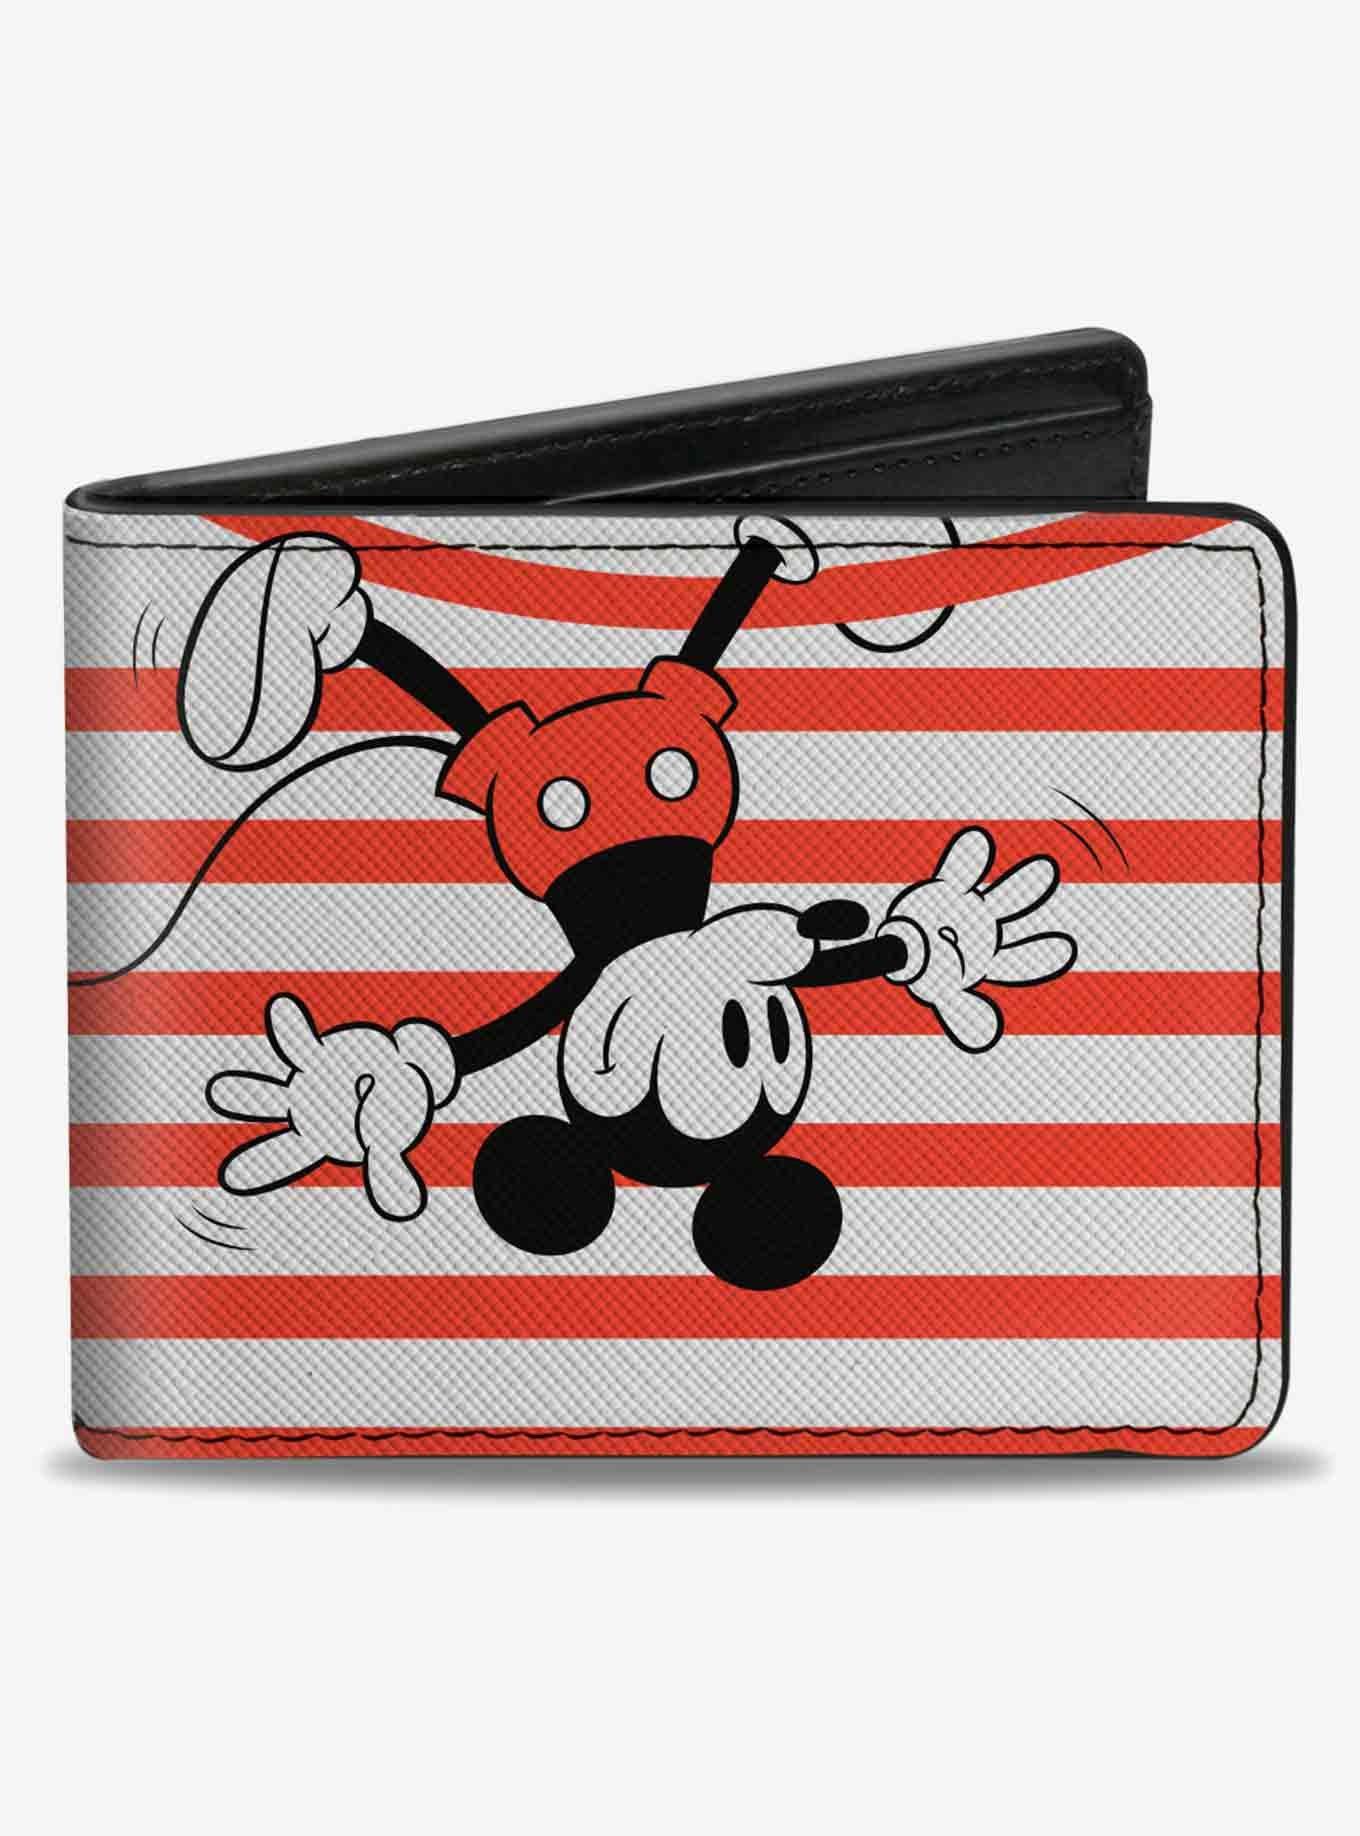 While looking for a classic, and adorable Mickey Purse, I stumbled